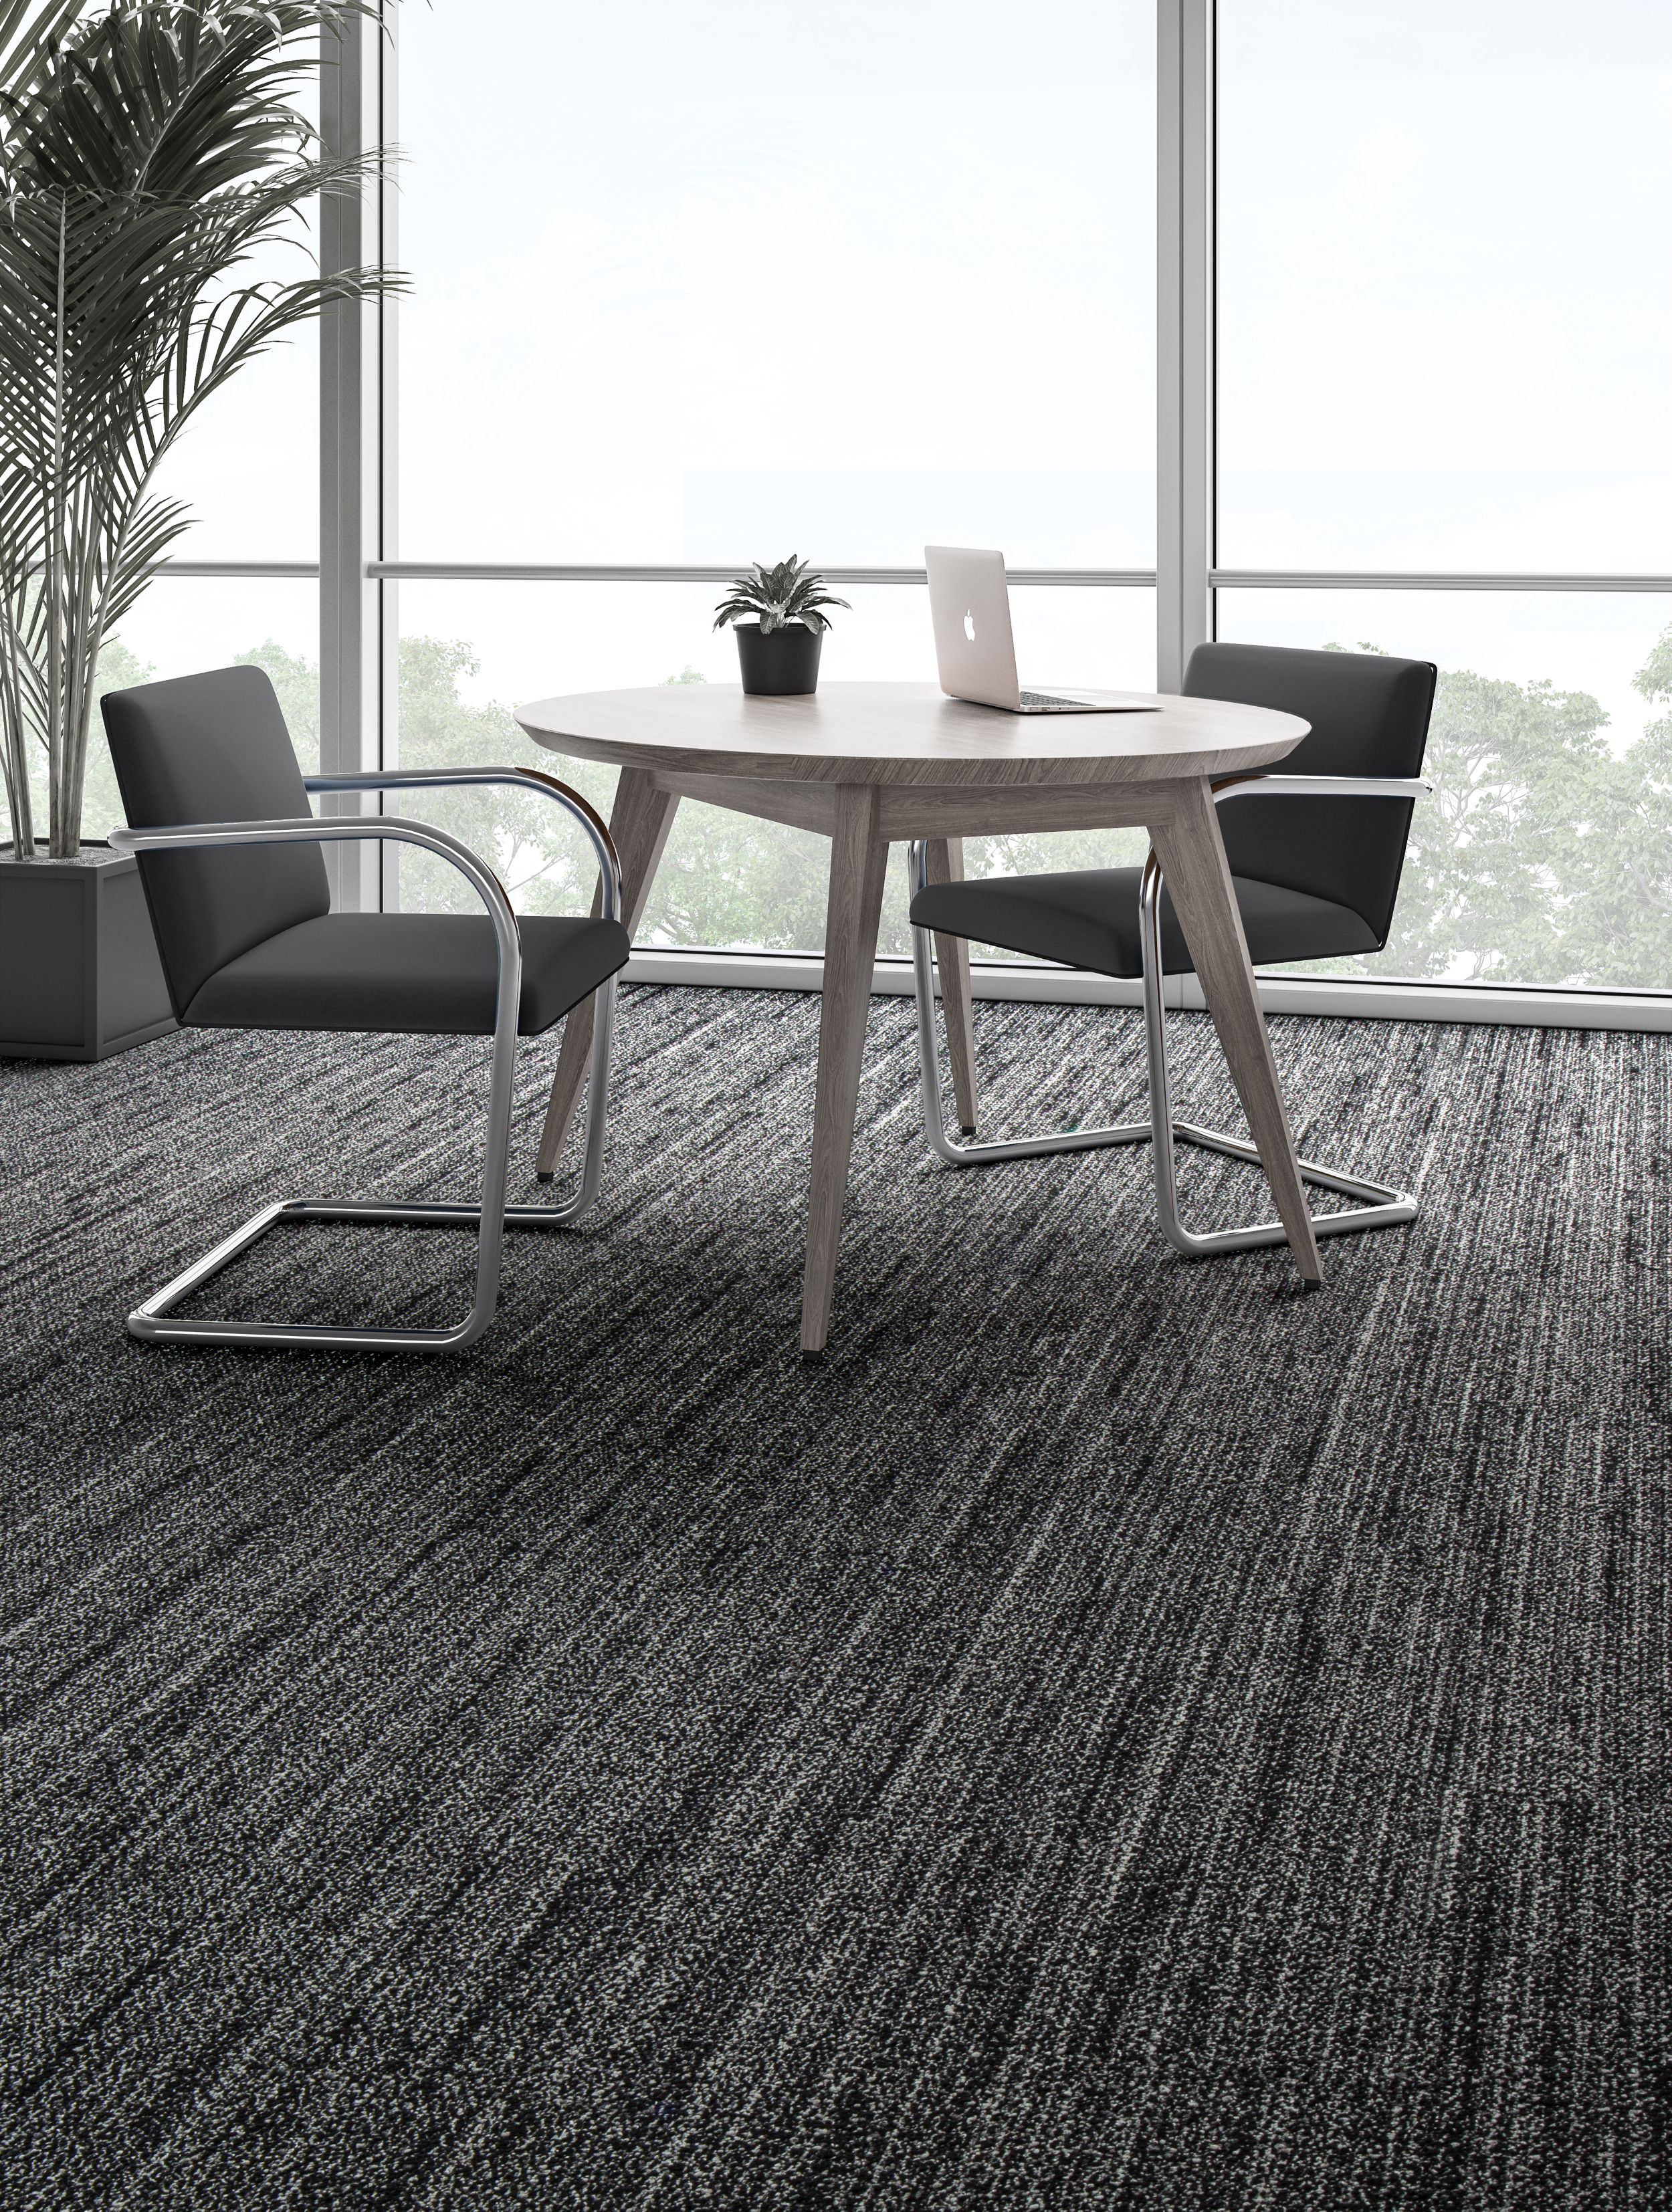 Interface WW870 plank carpet tile shown with small table and chairs imagen número 8